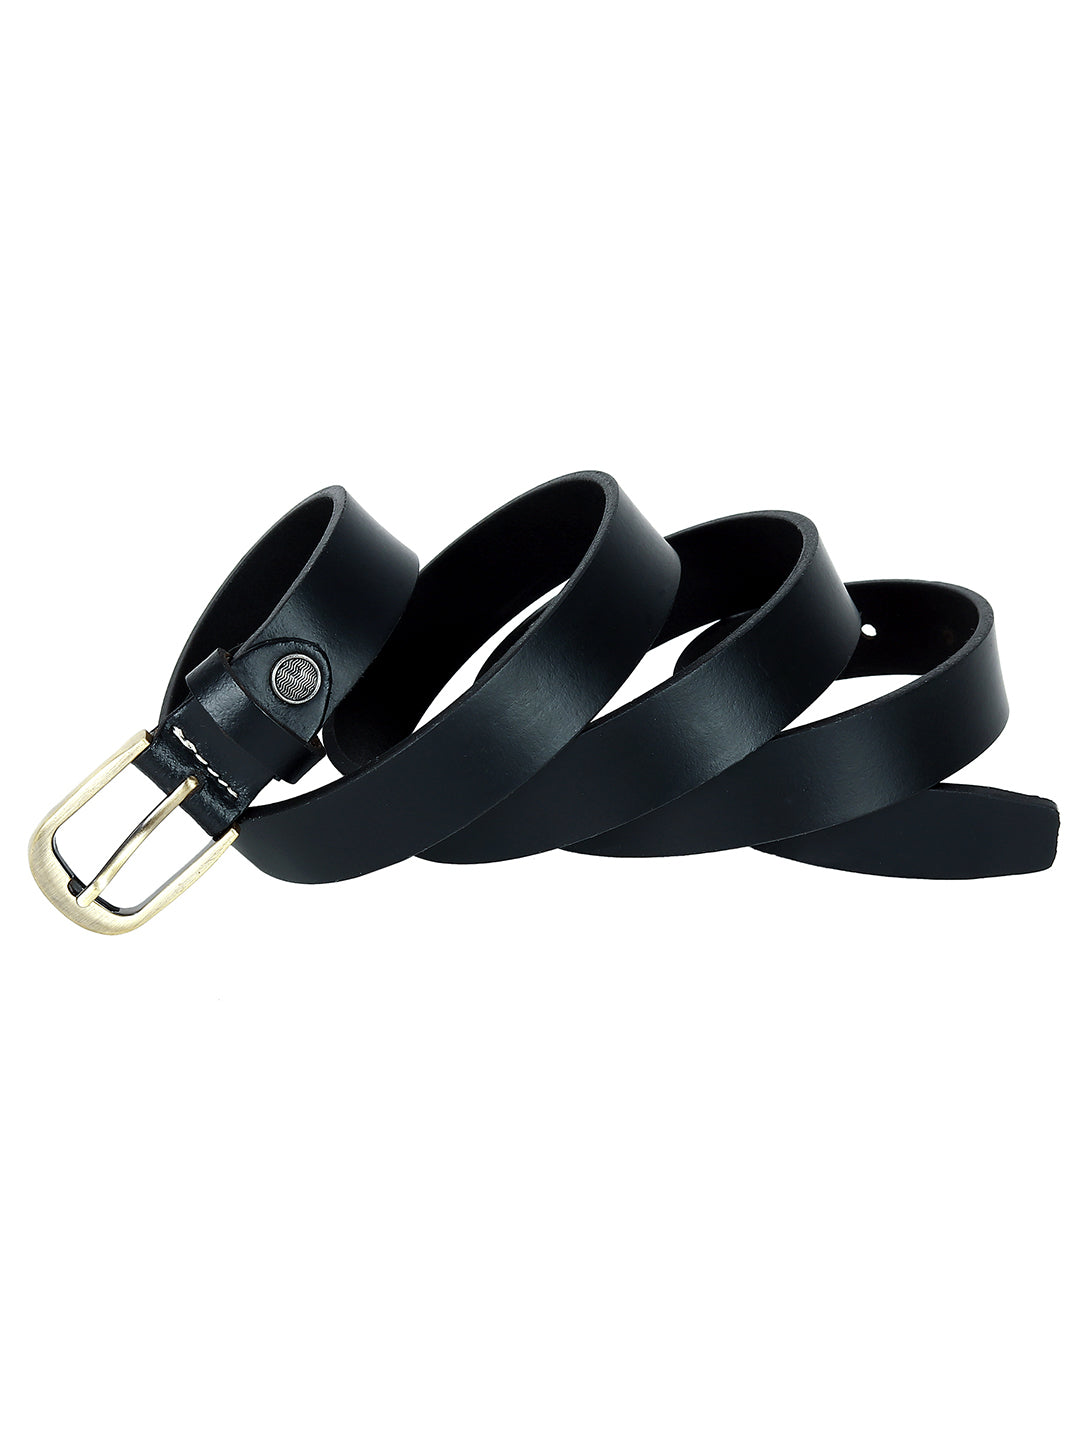 Leather World Formal Casual Black Stylish Genuine Leather Belts for Women